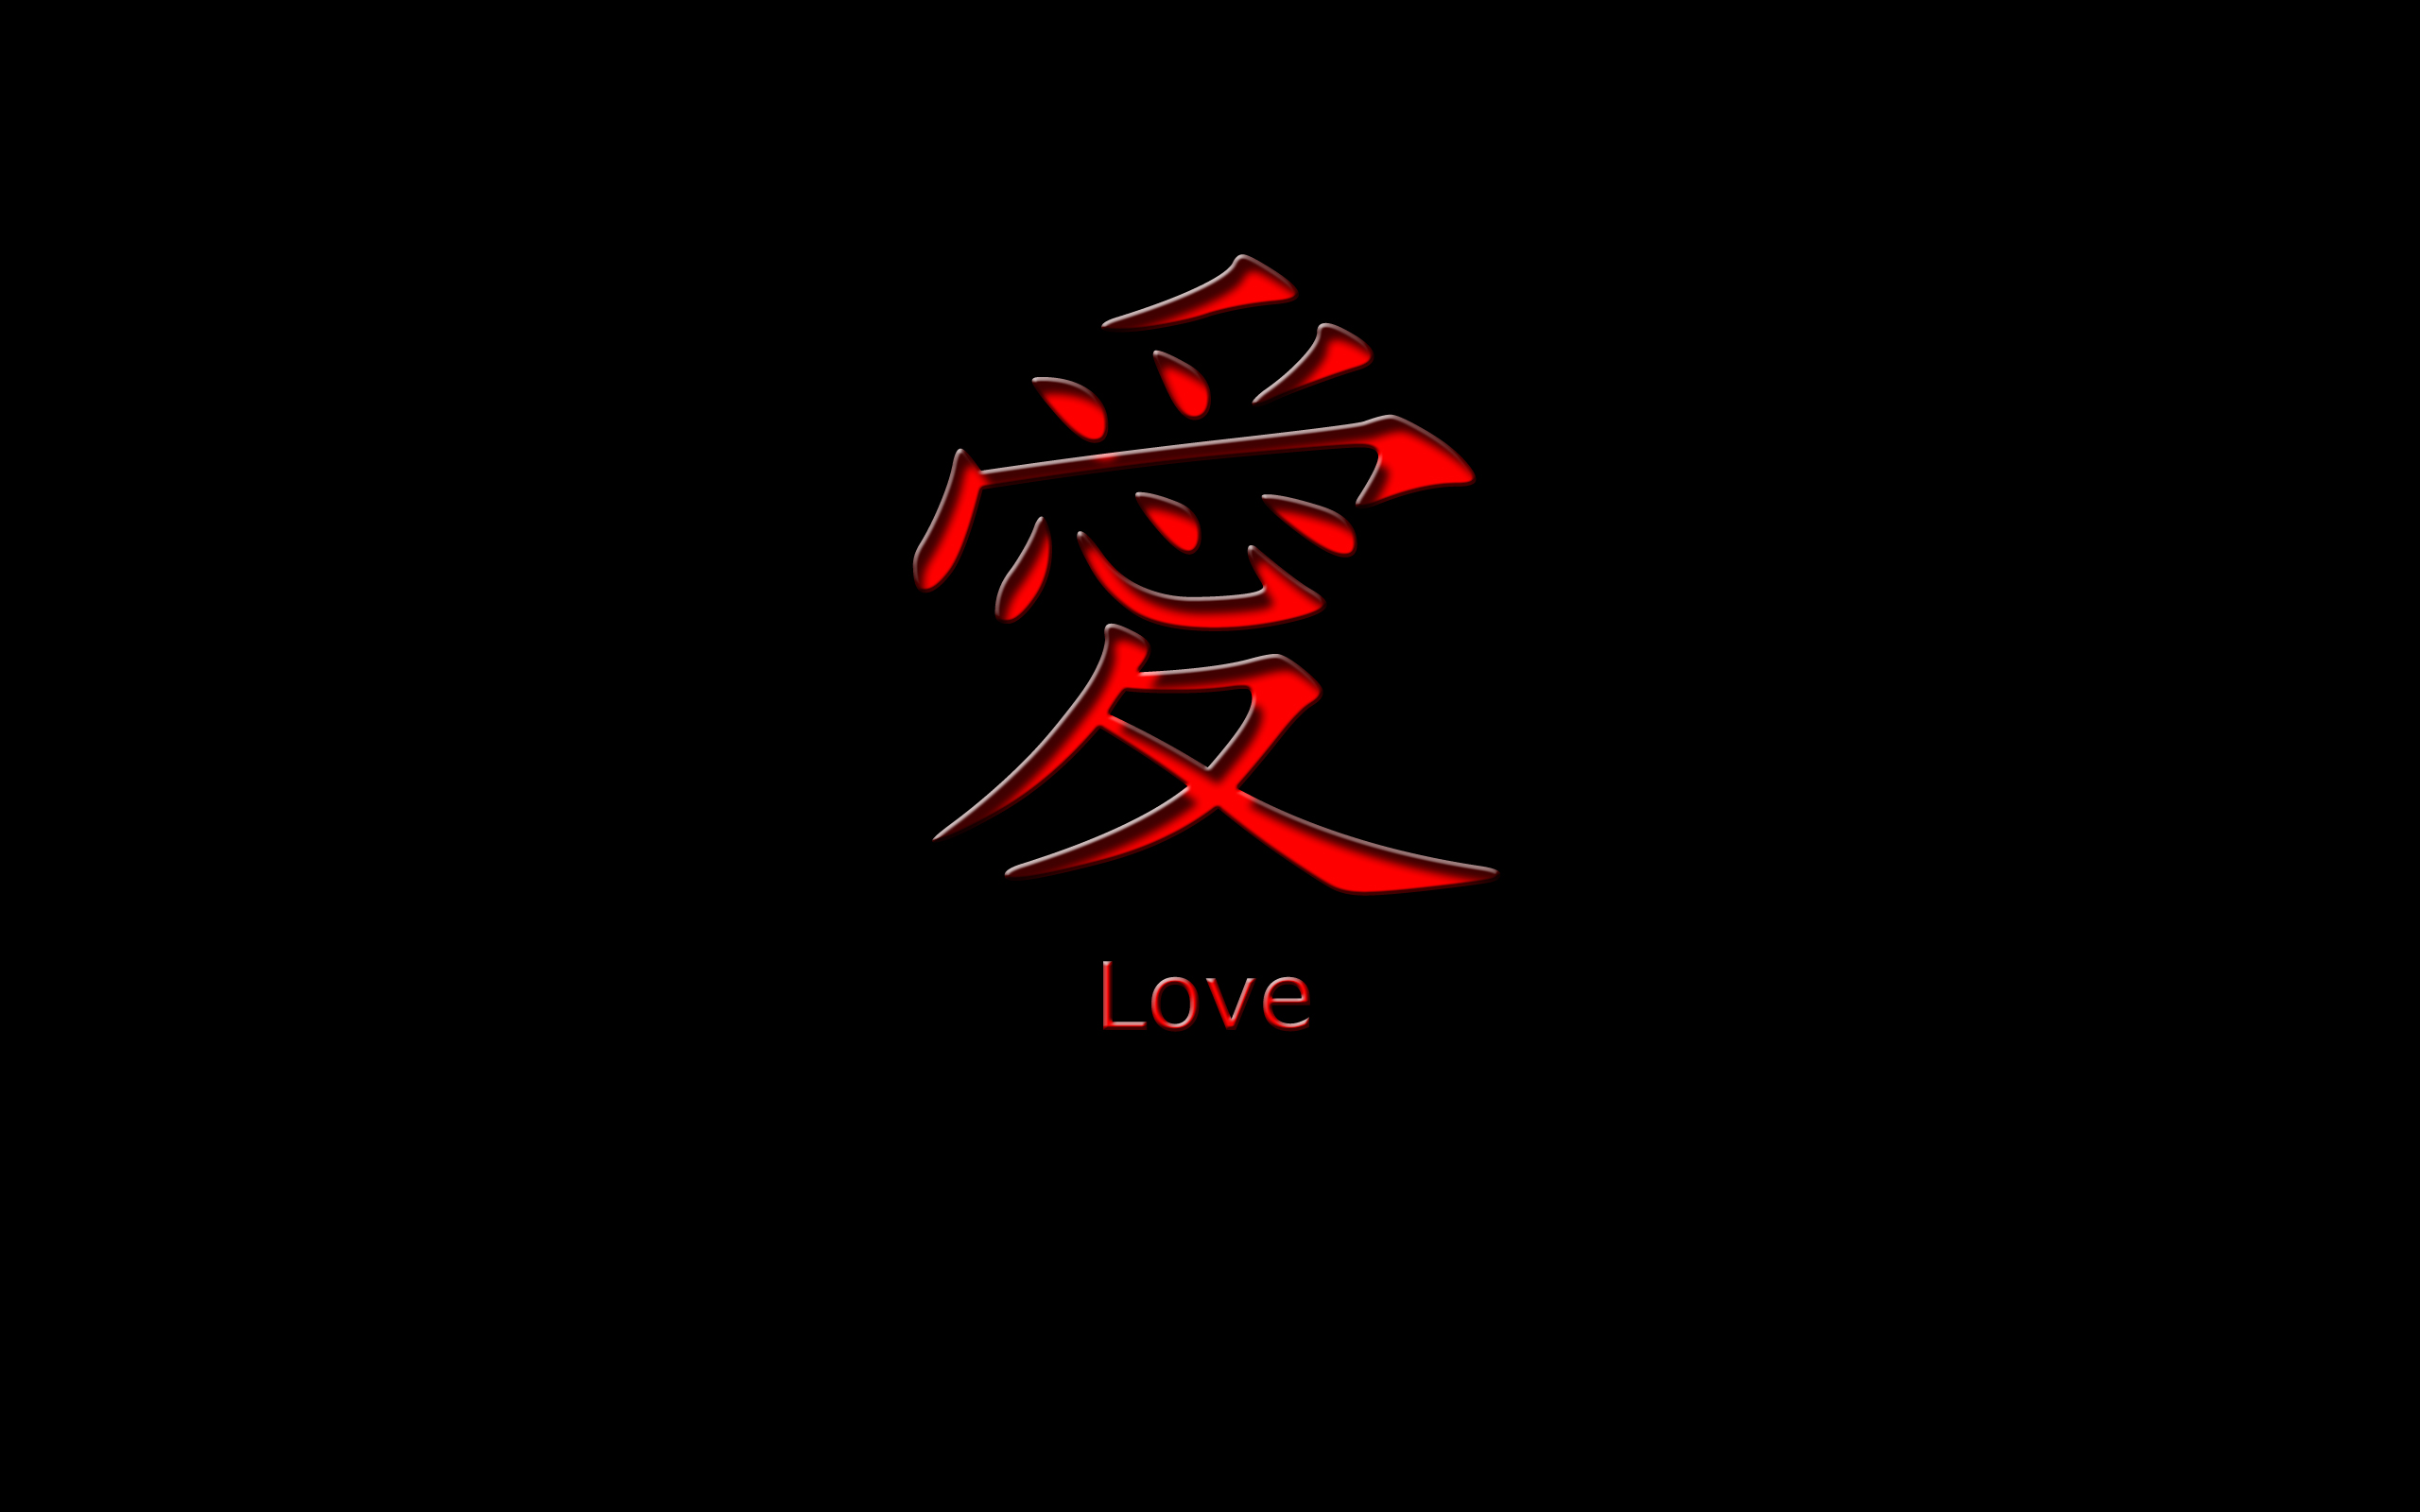 Wallpaper 26 Love Red and Black Wallpapers 2560x1600